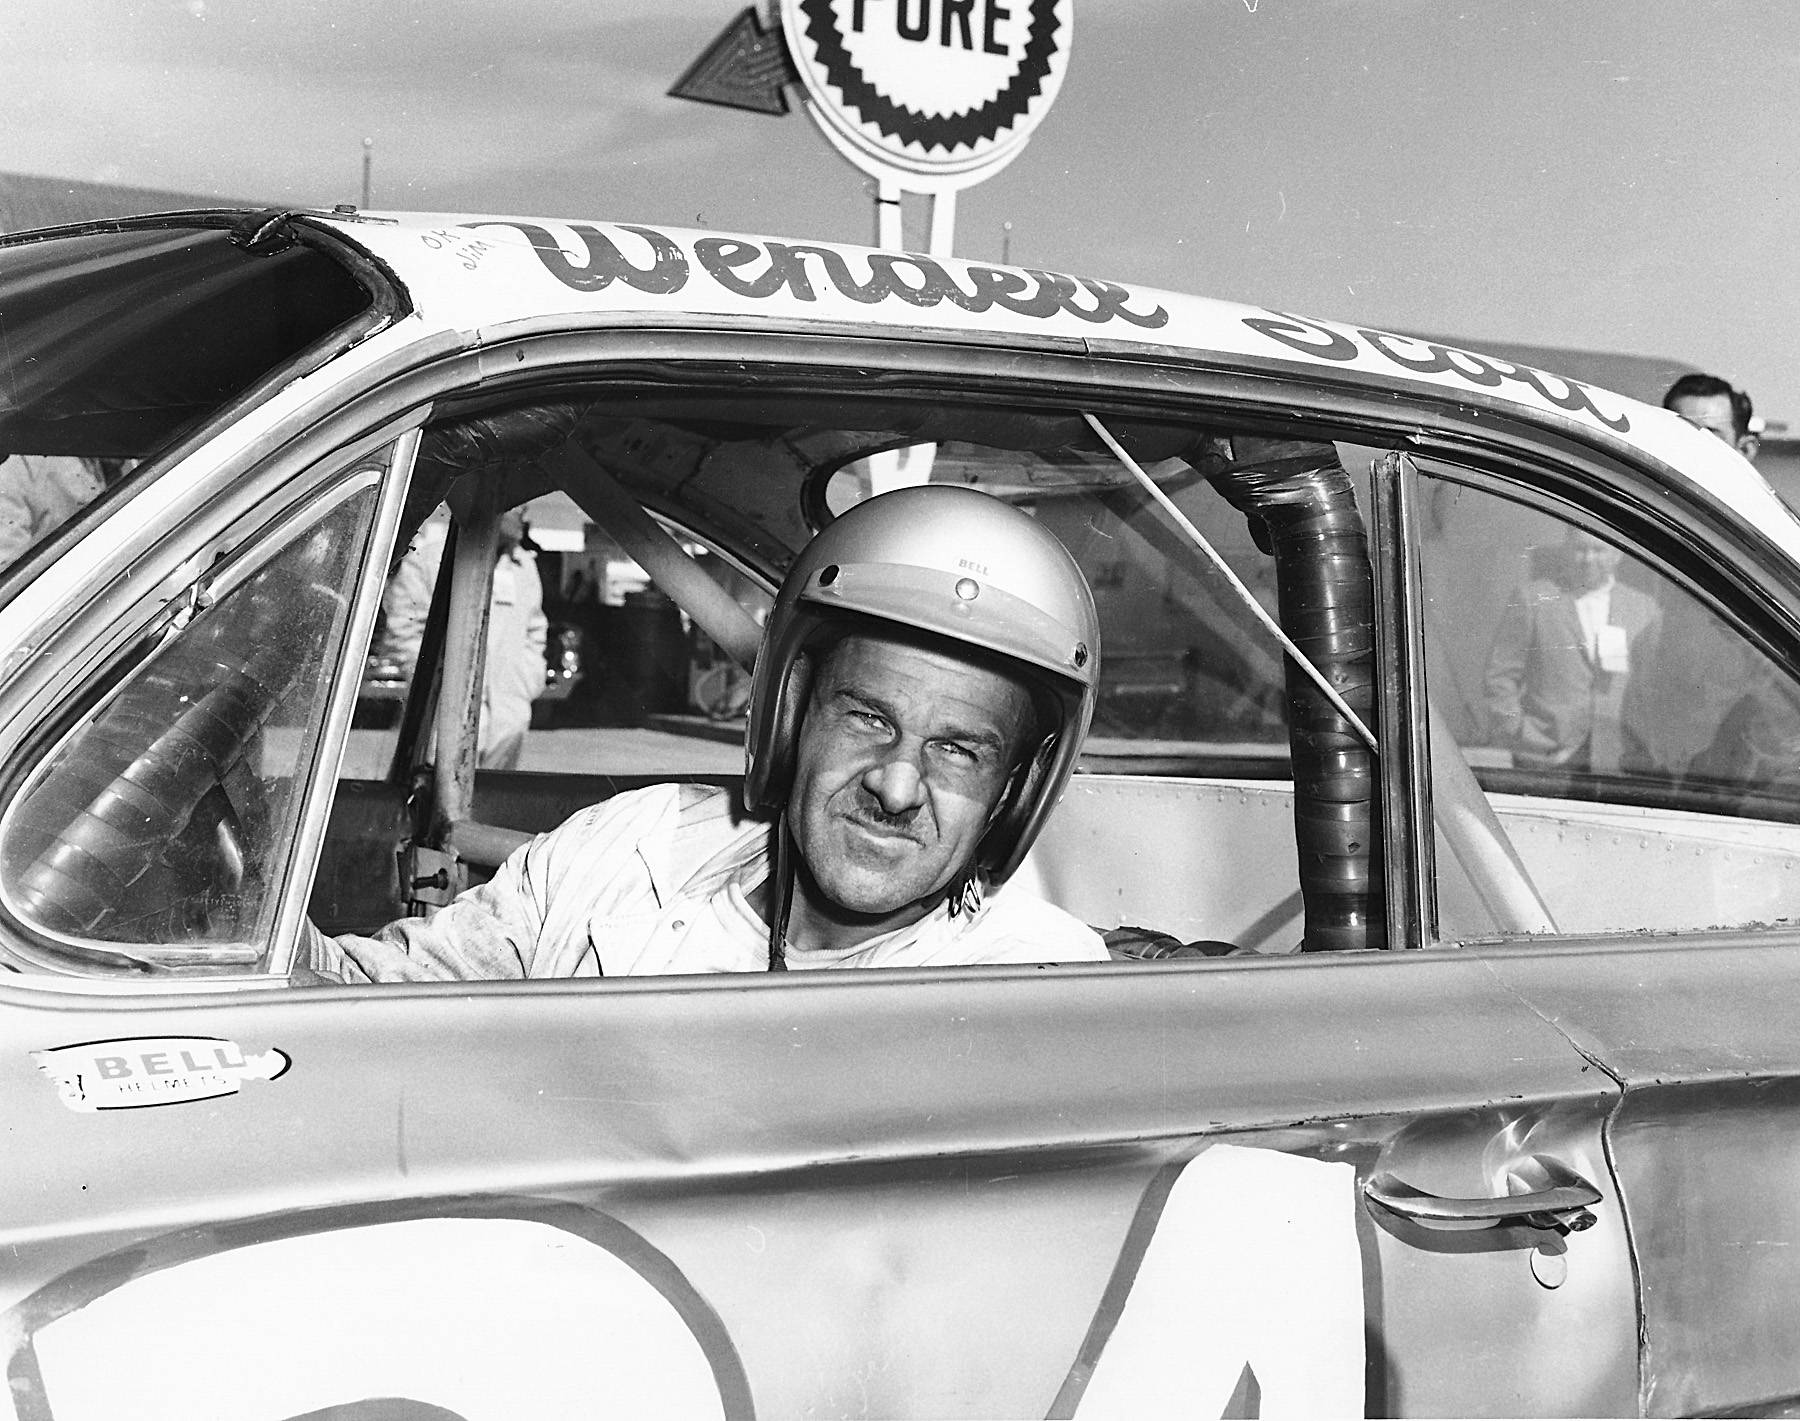 Pushing the Pedal to the Metal - BET.com looks back at African-Americans who blazed through racial barriers and took the racing world by storm. —Britt Middleton&nbsp;   Wendell Scott is regarded as the most prolific African-American racecar driver to ever hit the track. He faced great racial barriers over his career, but eventually became the first African-American to start in a NASCAR race (the Spartanburg 200 in Spartanberg, South Carolina, on March 4, 1961) and went on to compete in roughly 495 more NASCAR races from 1961 through 1973.  (Photo: ISC Archives via Getty Images)